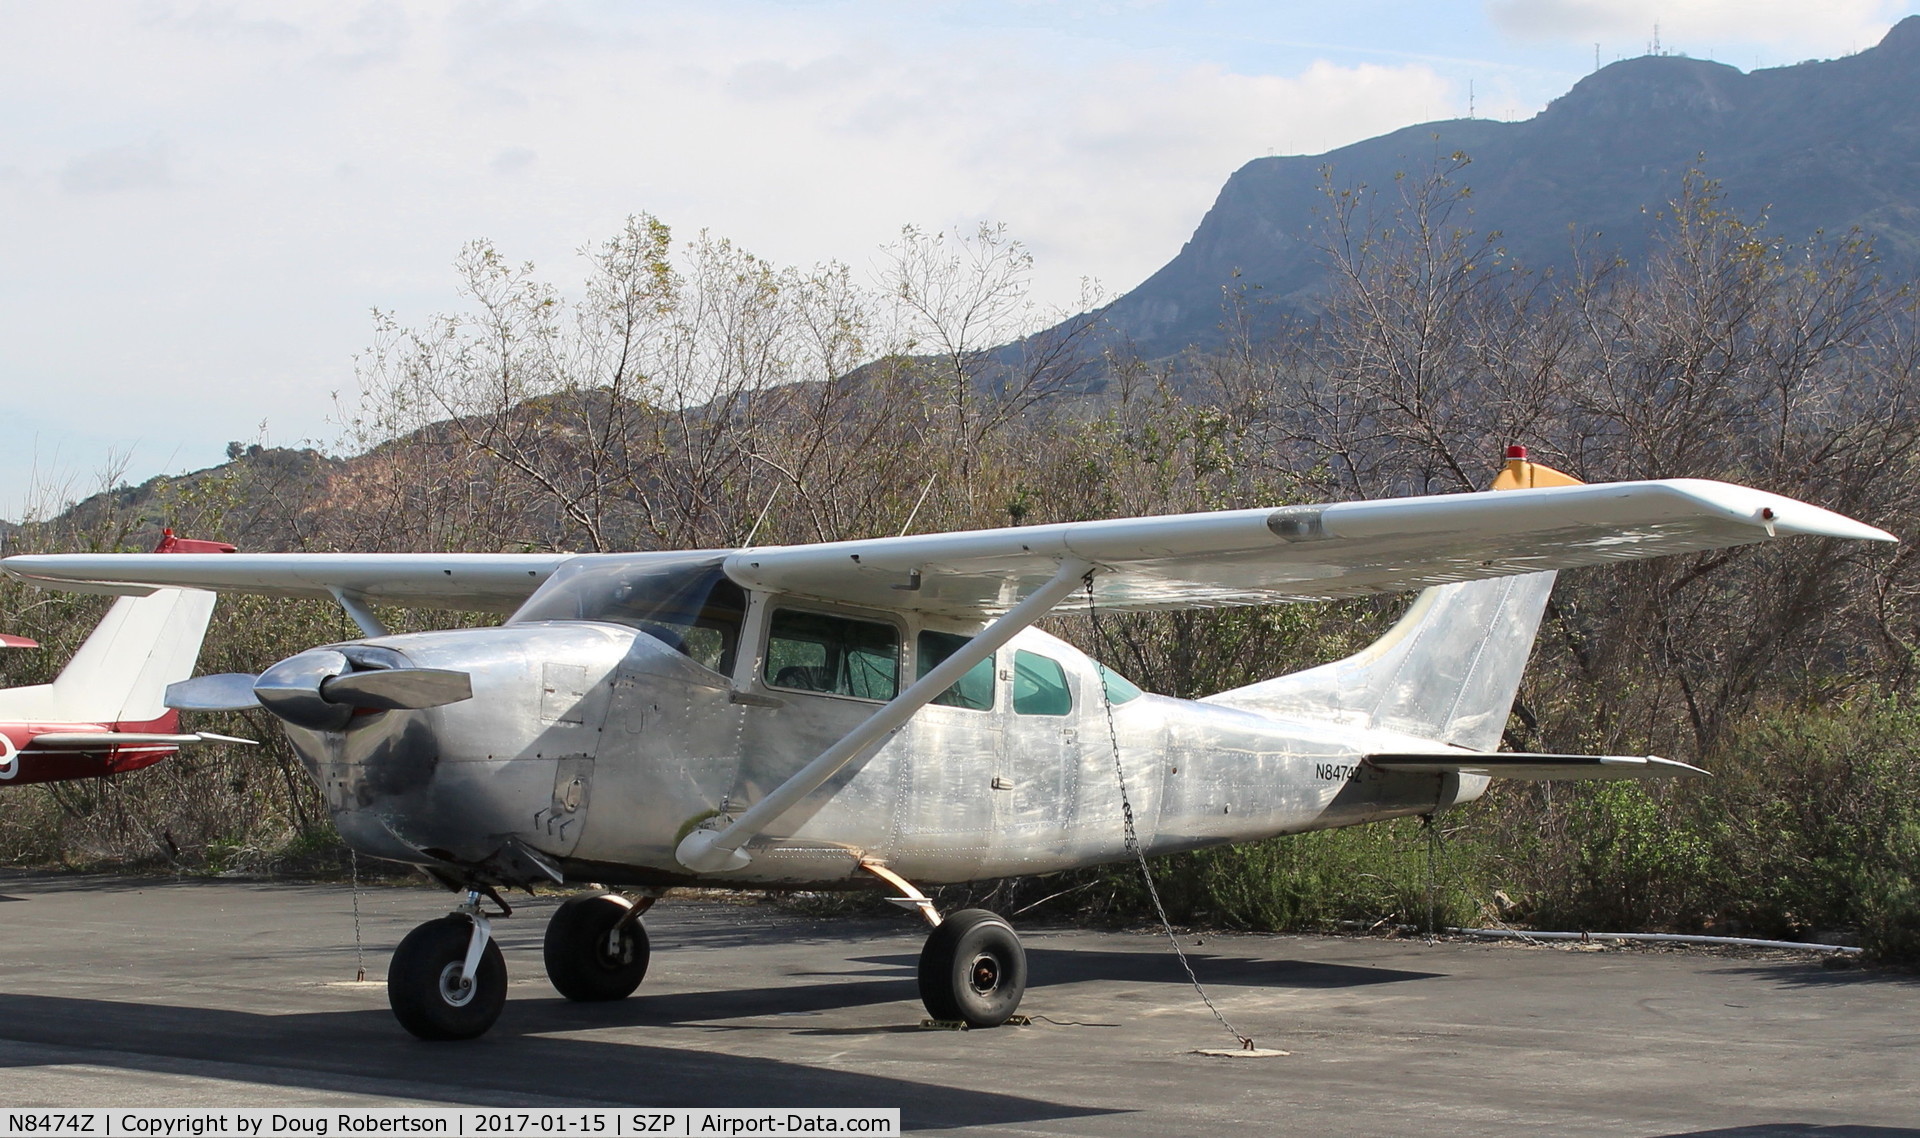 N8474Z, 1963 Cessna 210-5 C/N 205-0474, 1963 Cessna 210-5 (205) UTILINE, Continental IO-470-E 260 Hp, fixed-gear version of Cessna 210C-advantages-more interior room, lower insurance costs, no gear-up landings